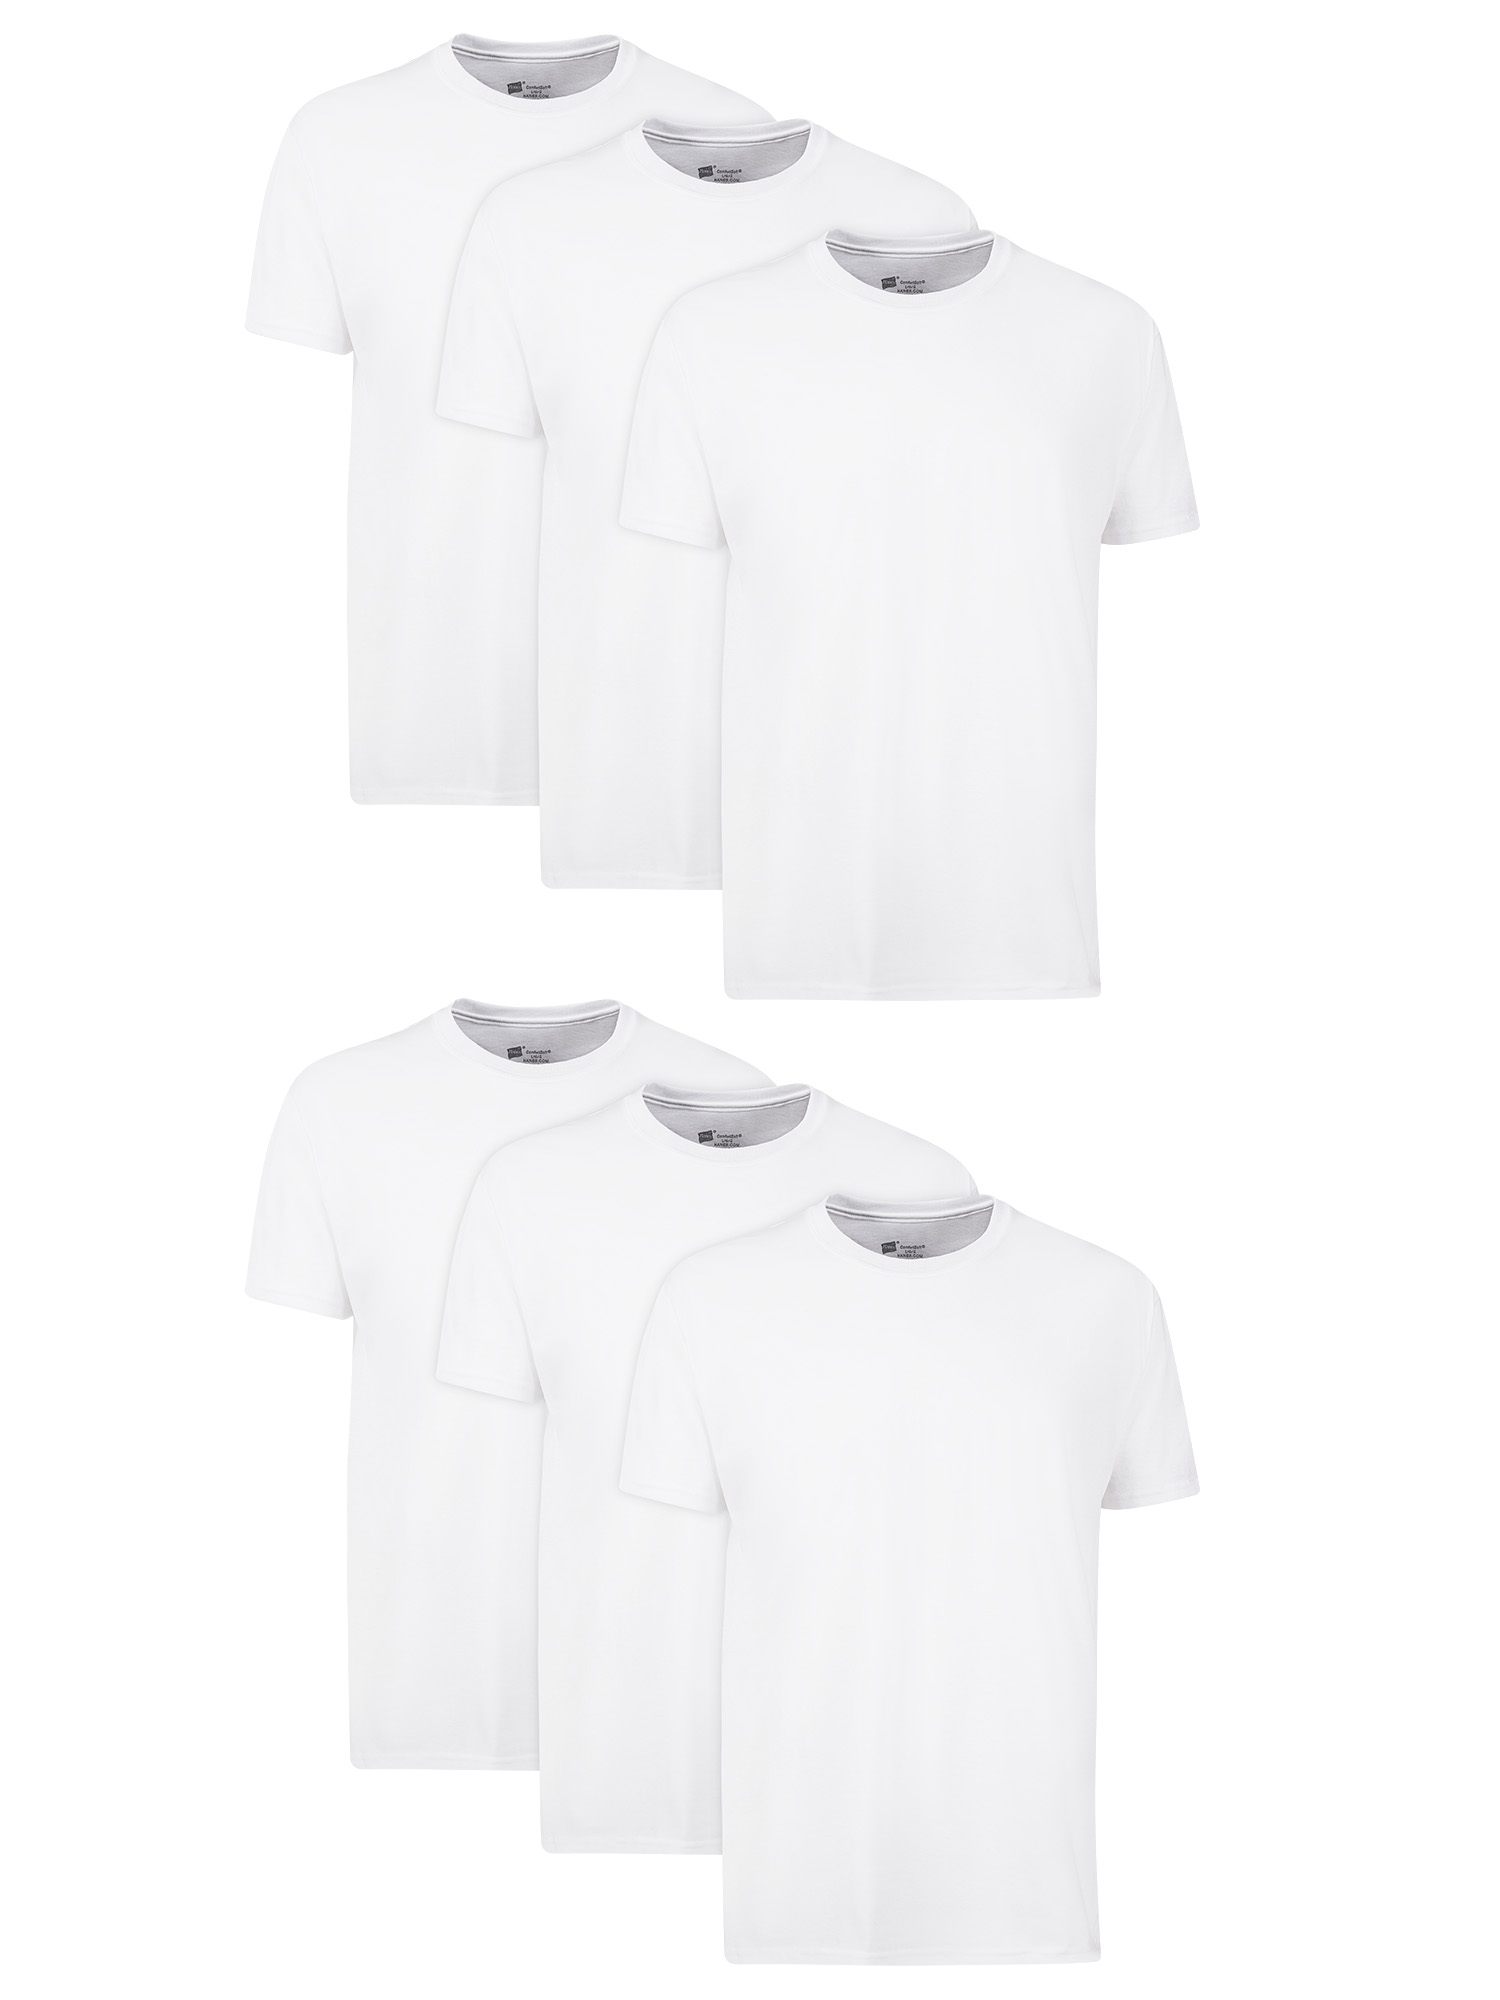 Hanes Men's Value Pack White Crew T-Shirt Undershirts, 6 Pack - image 1 of 10